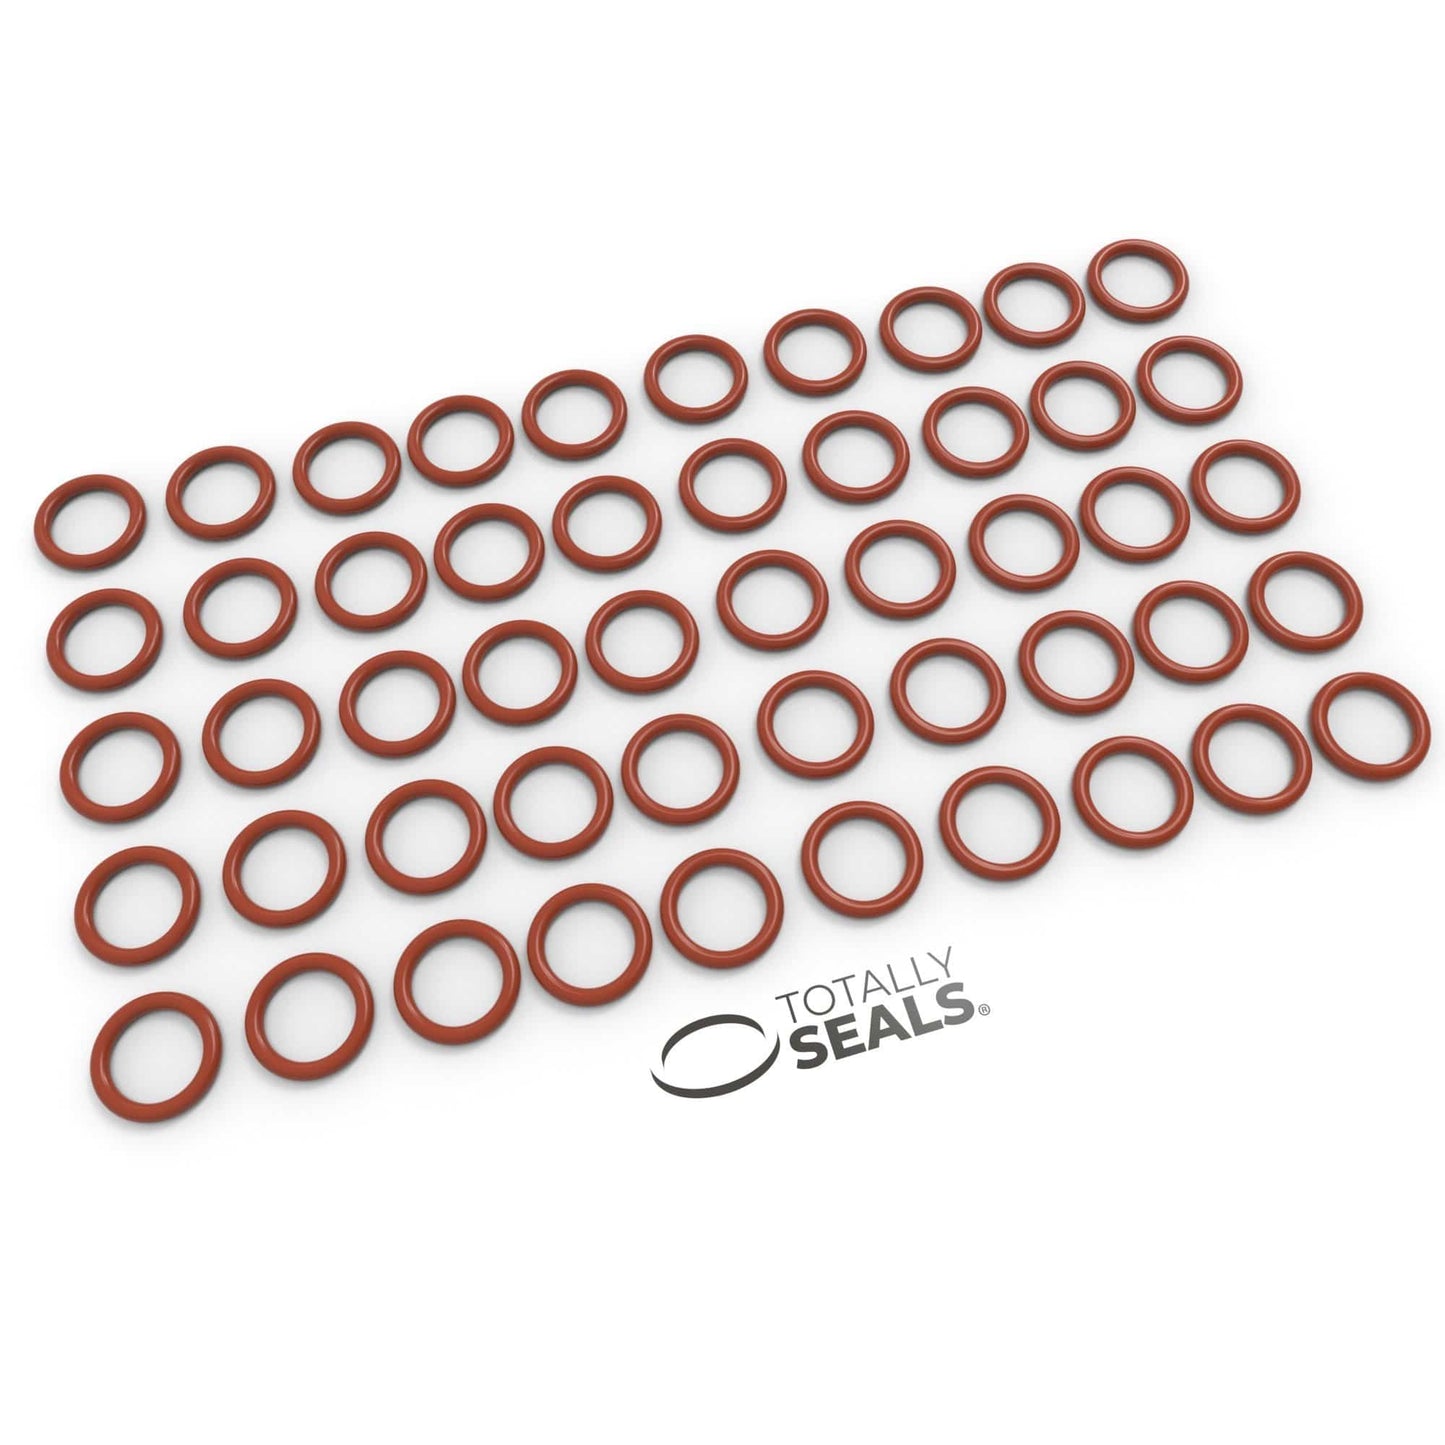 10mm x 2.5mm (15mm OD) Silicone O-Rings - Totally Seals®